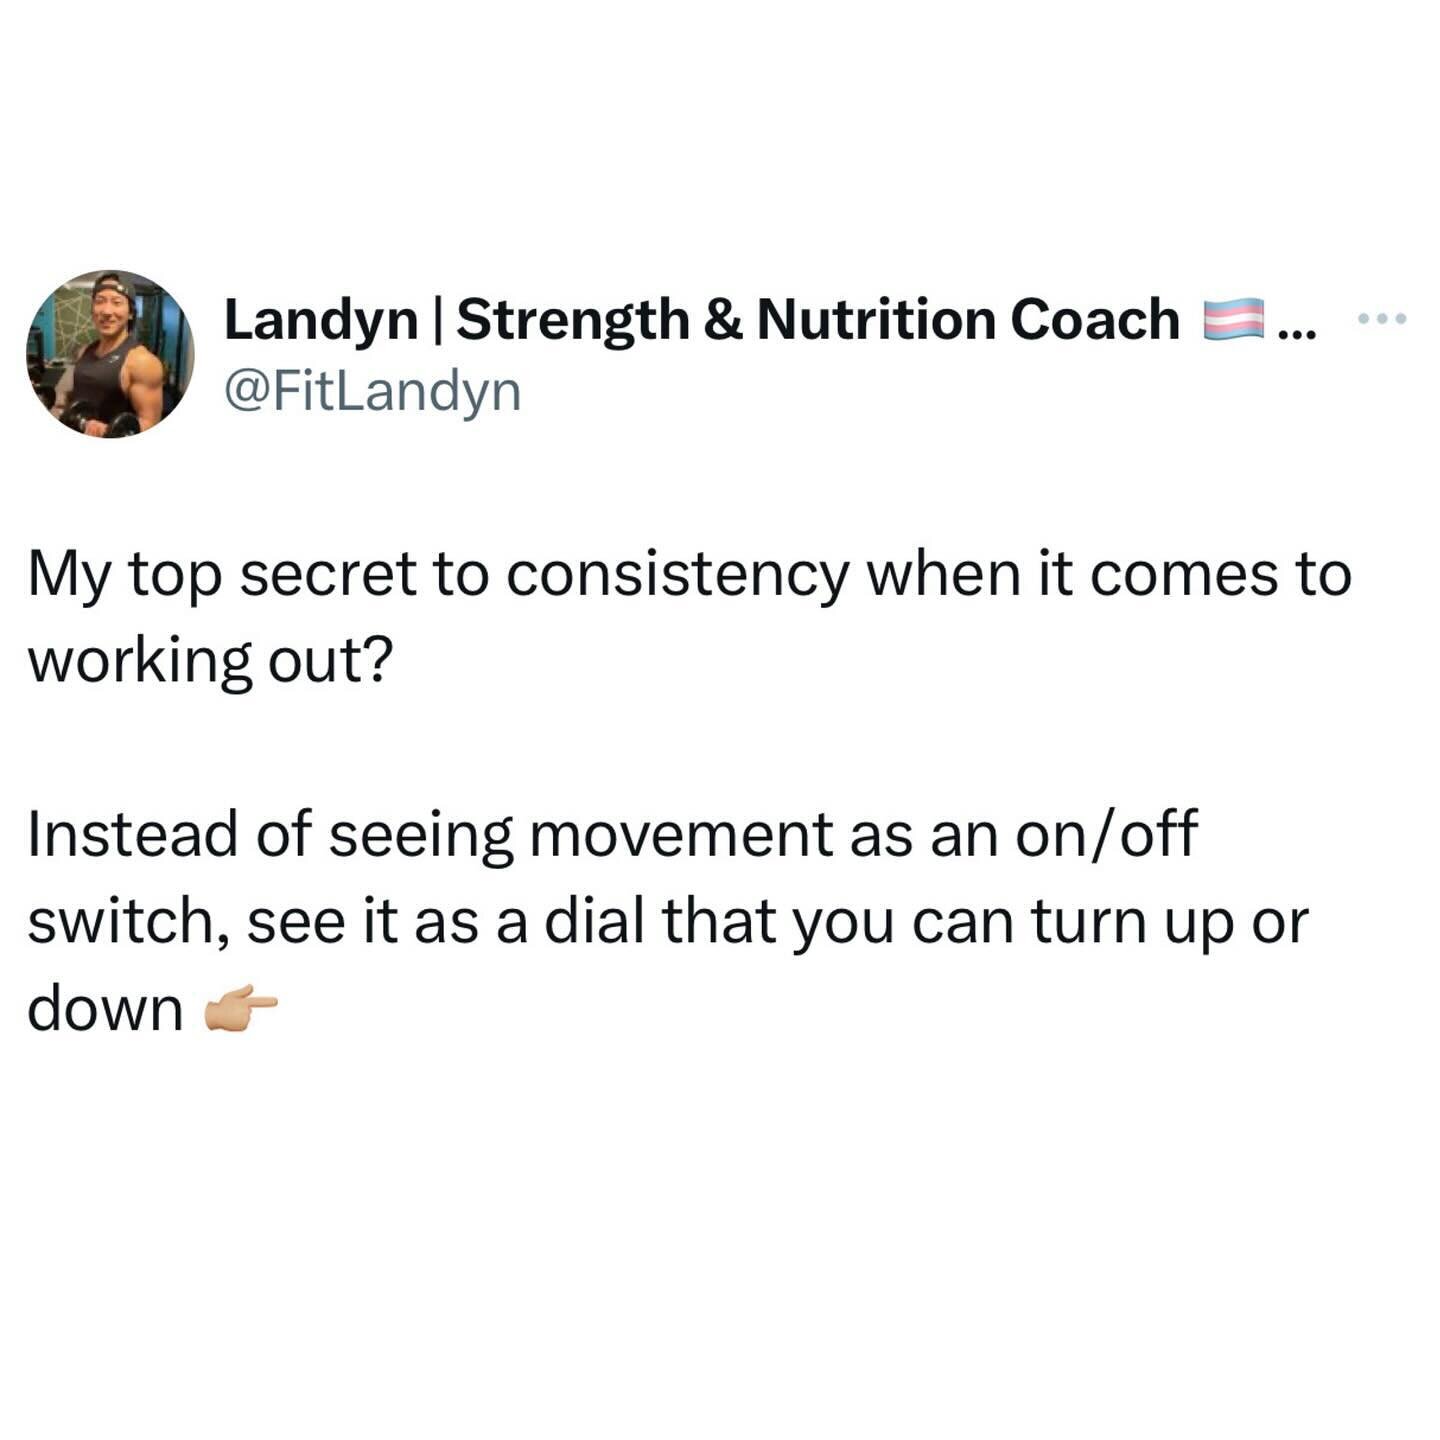 Think of movement as a dial, not an on/off switch! Here&rsquo;s how:

🔄 On/Off Switch Mentality:

- Fitness is either &ldquo;on&rdquo; during light schedules and calm times.

- Or &ldquo;off&rdquo; during busy workdays, bad weather, or life transiti